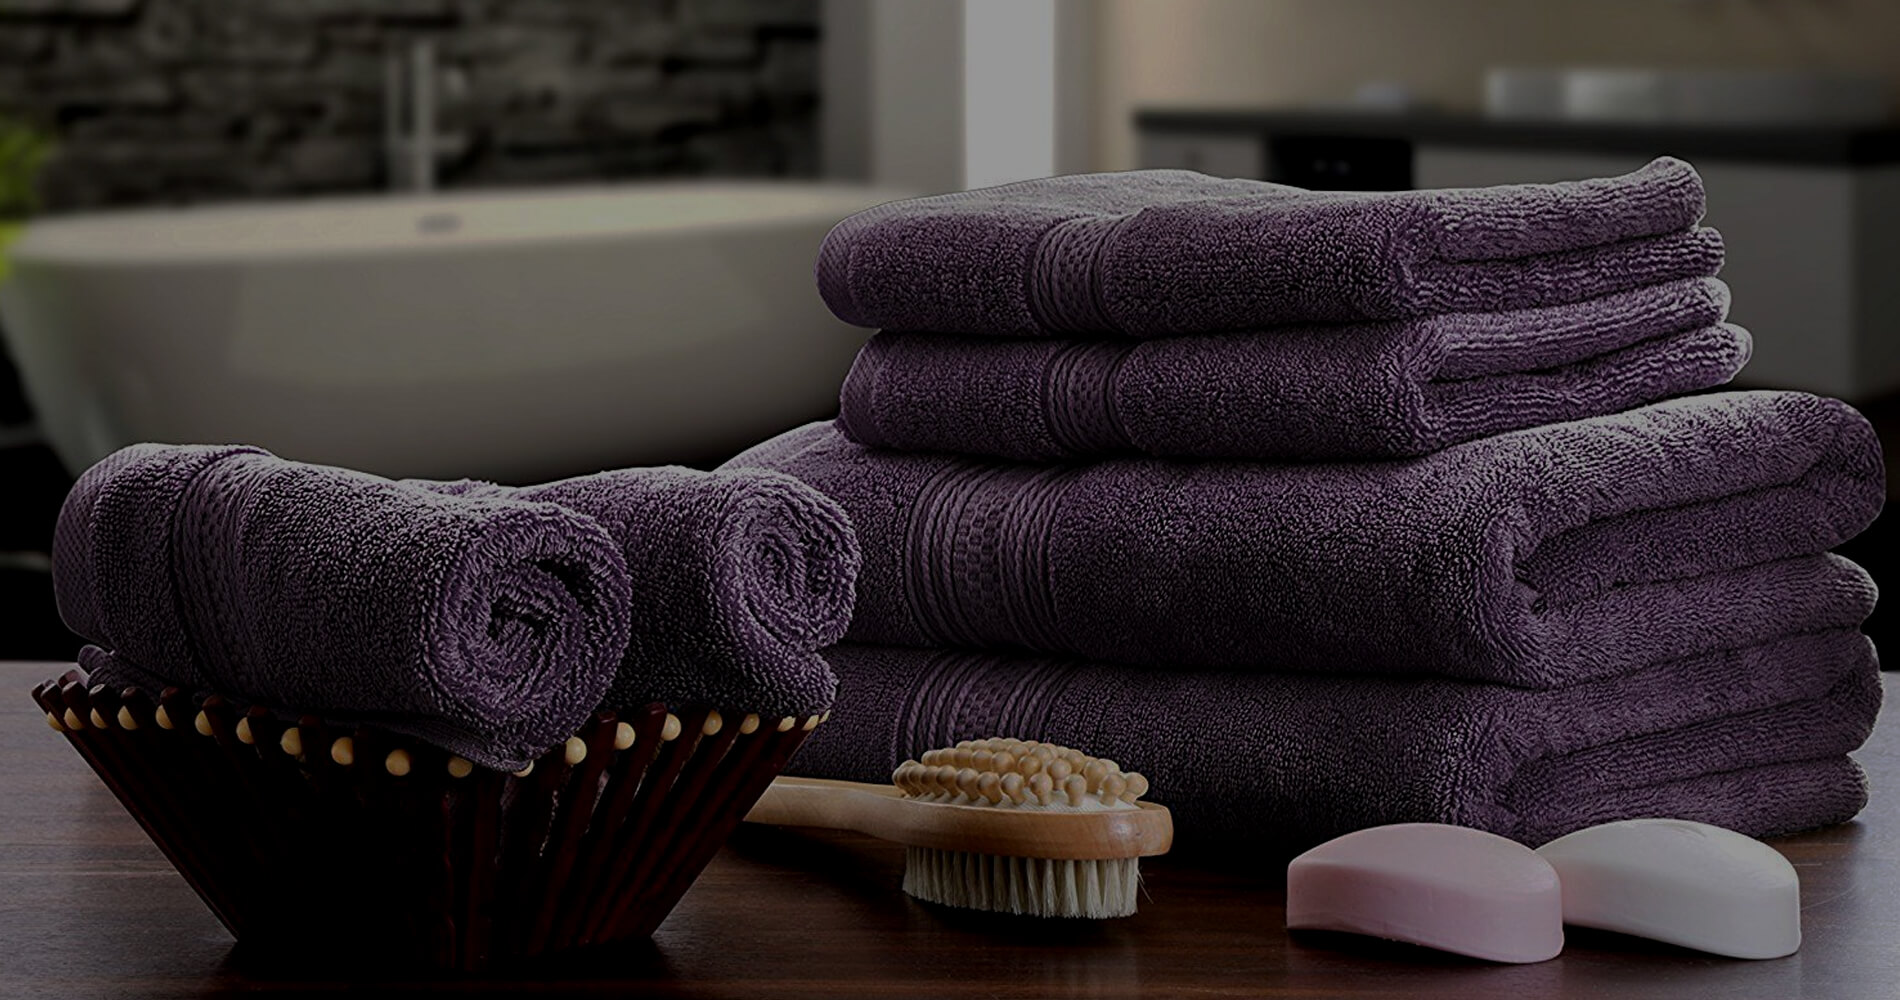 custom-personalized-towels-manufacturer